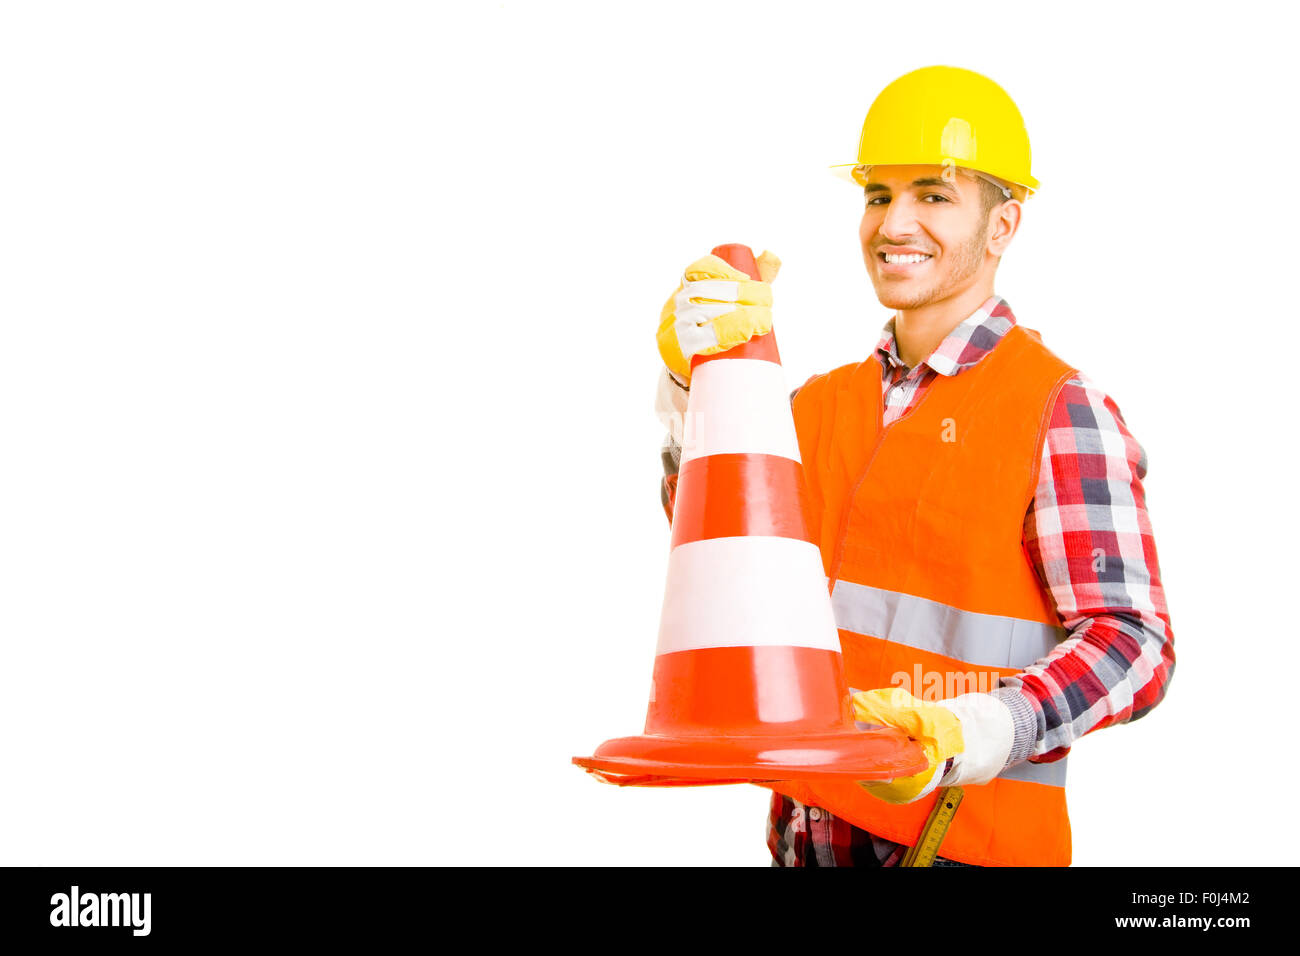 Happy construction worker carrying a traffic cone Stock Photo